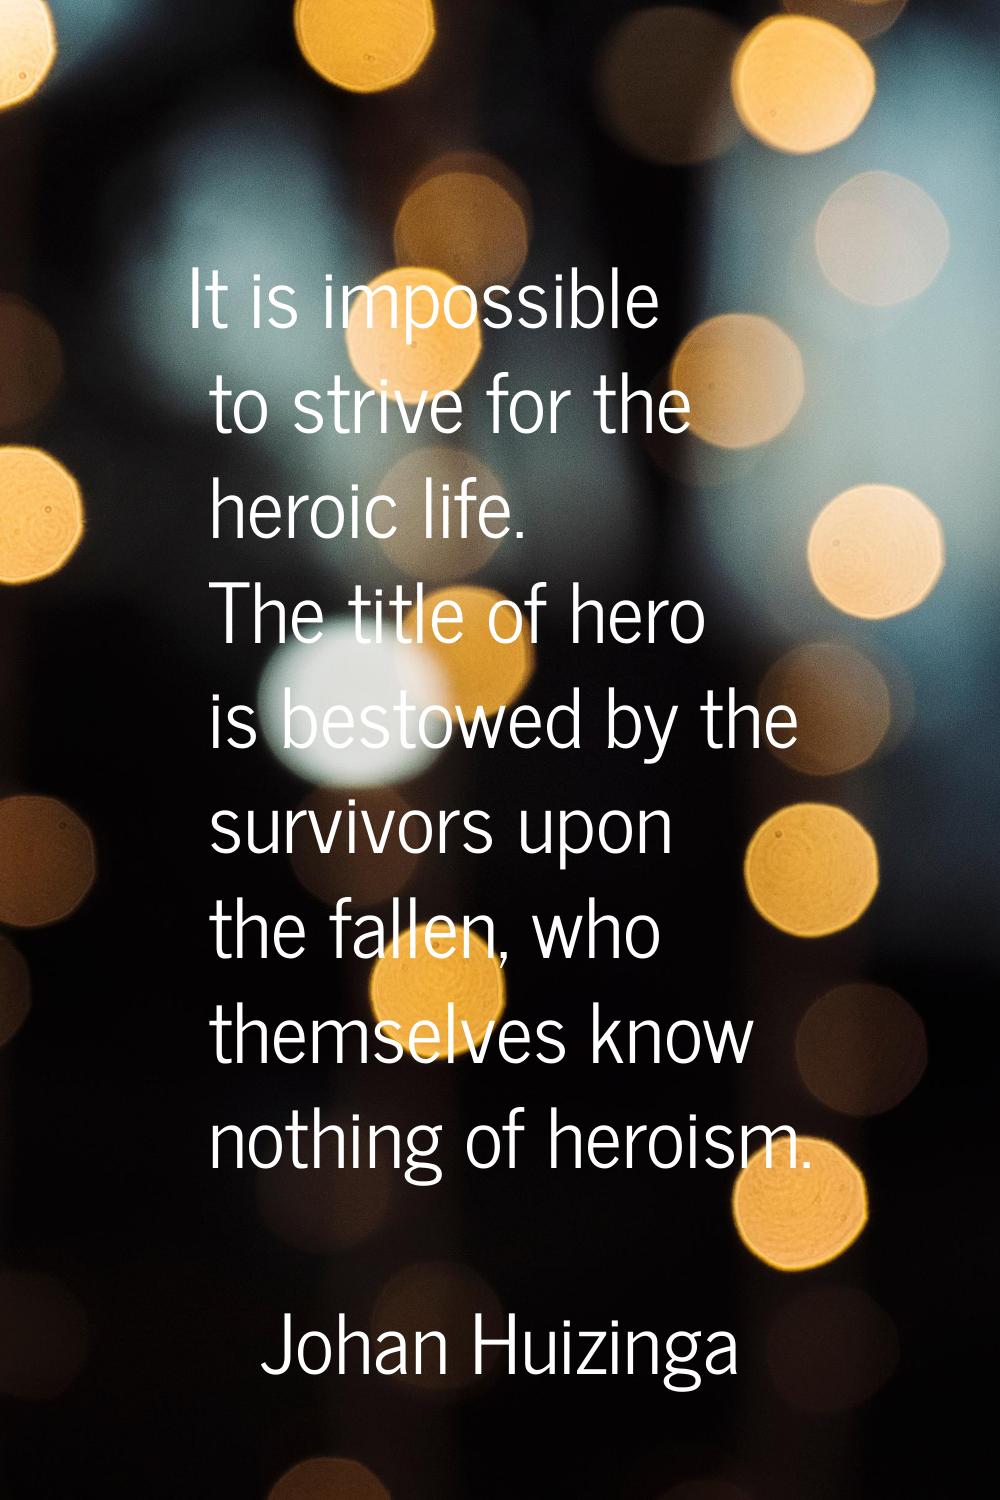 It is impossible to strive for the heroic life. The title of hero is bestowed by the survivors upon